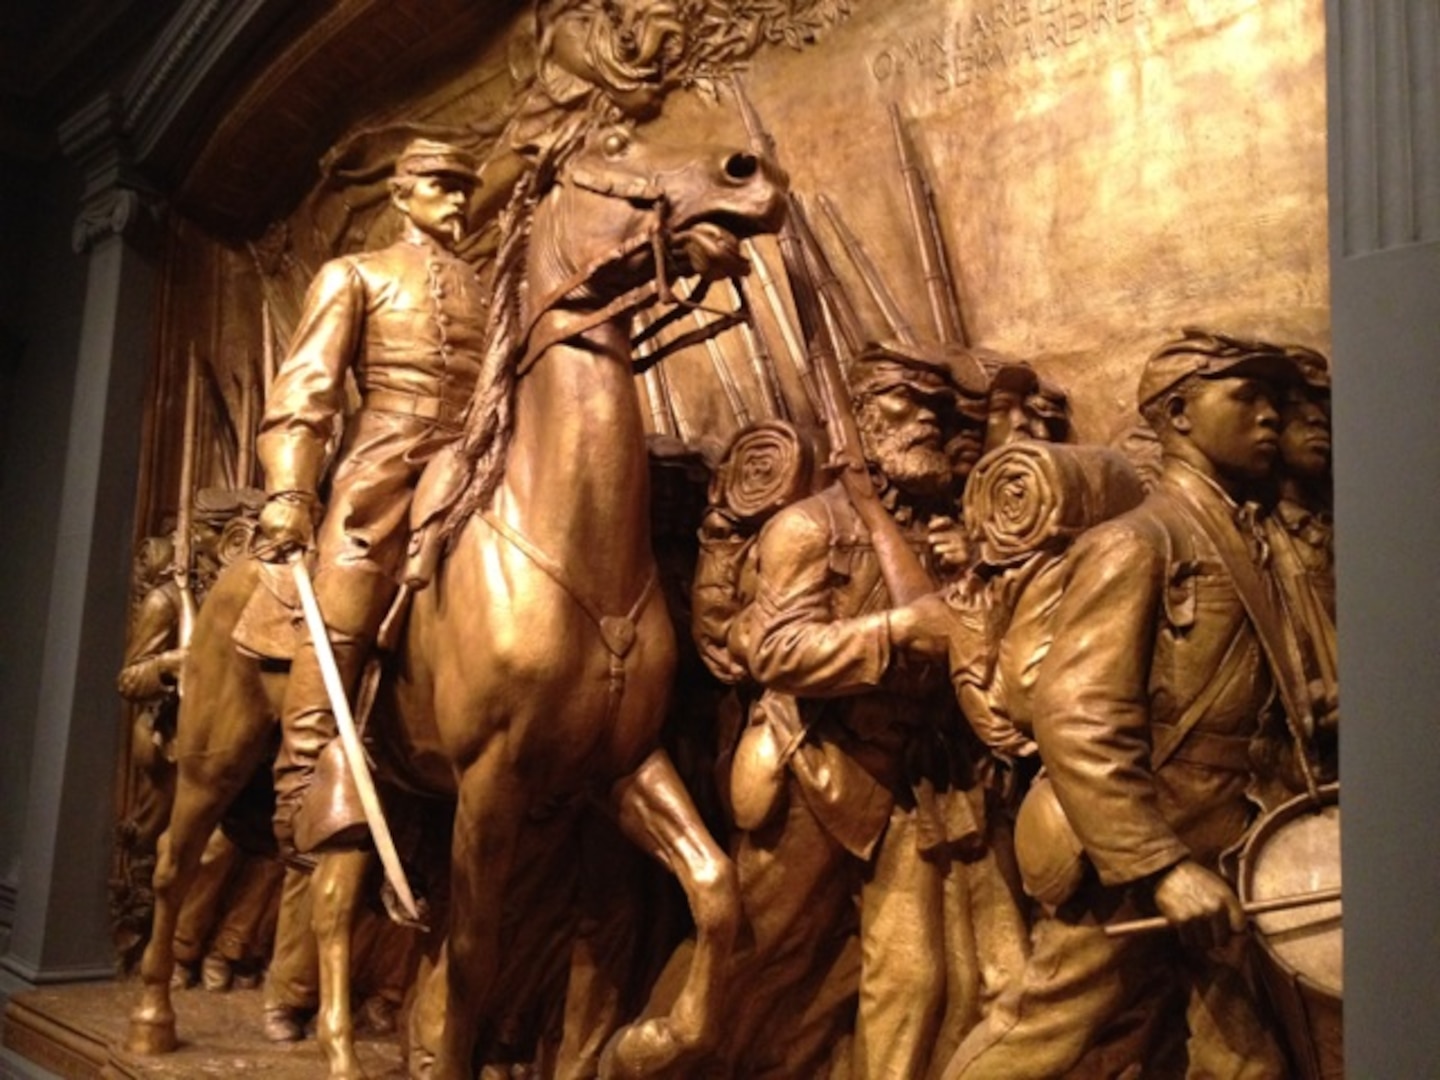 The exhibition at the National Gallery of Art celebrates the renowned Augustus Saint-Gaudens' Shaw Memorial, which depicts soldiers marching toward Fort Wagner near Charleston, S.C., July 18, 1863, led by Col. Robert Gould Shaw. 